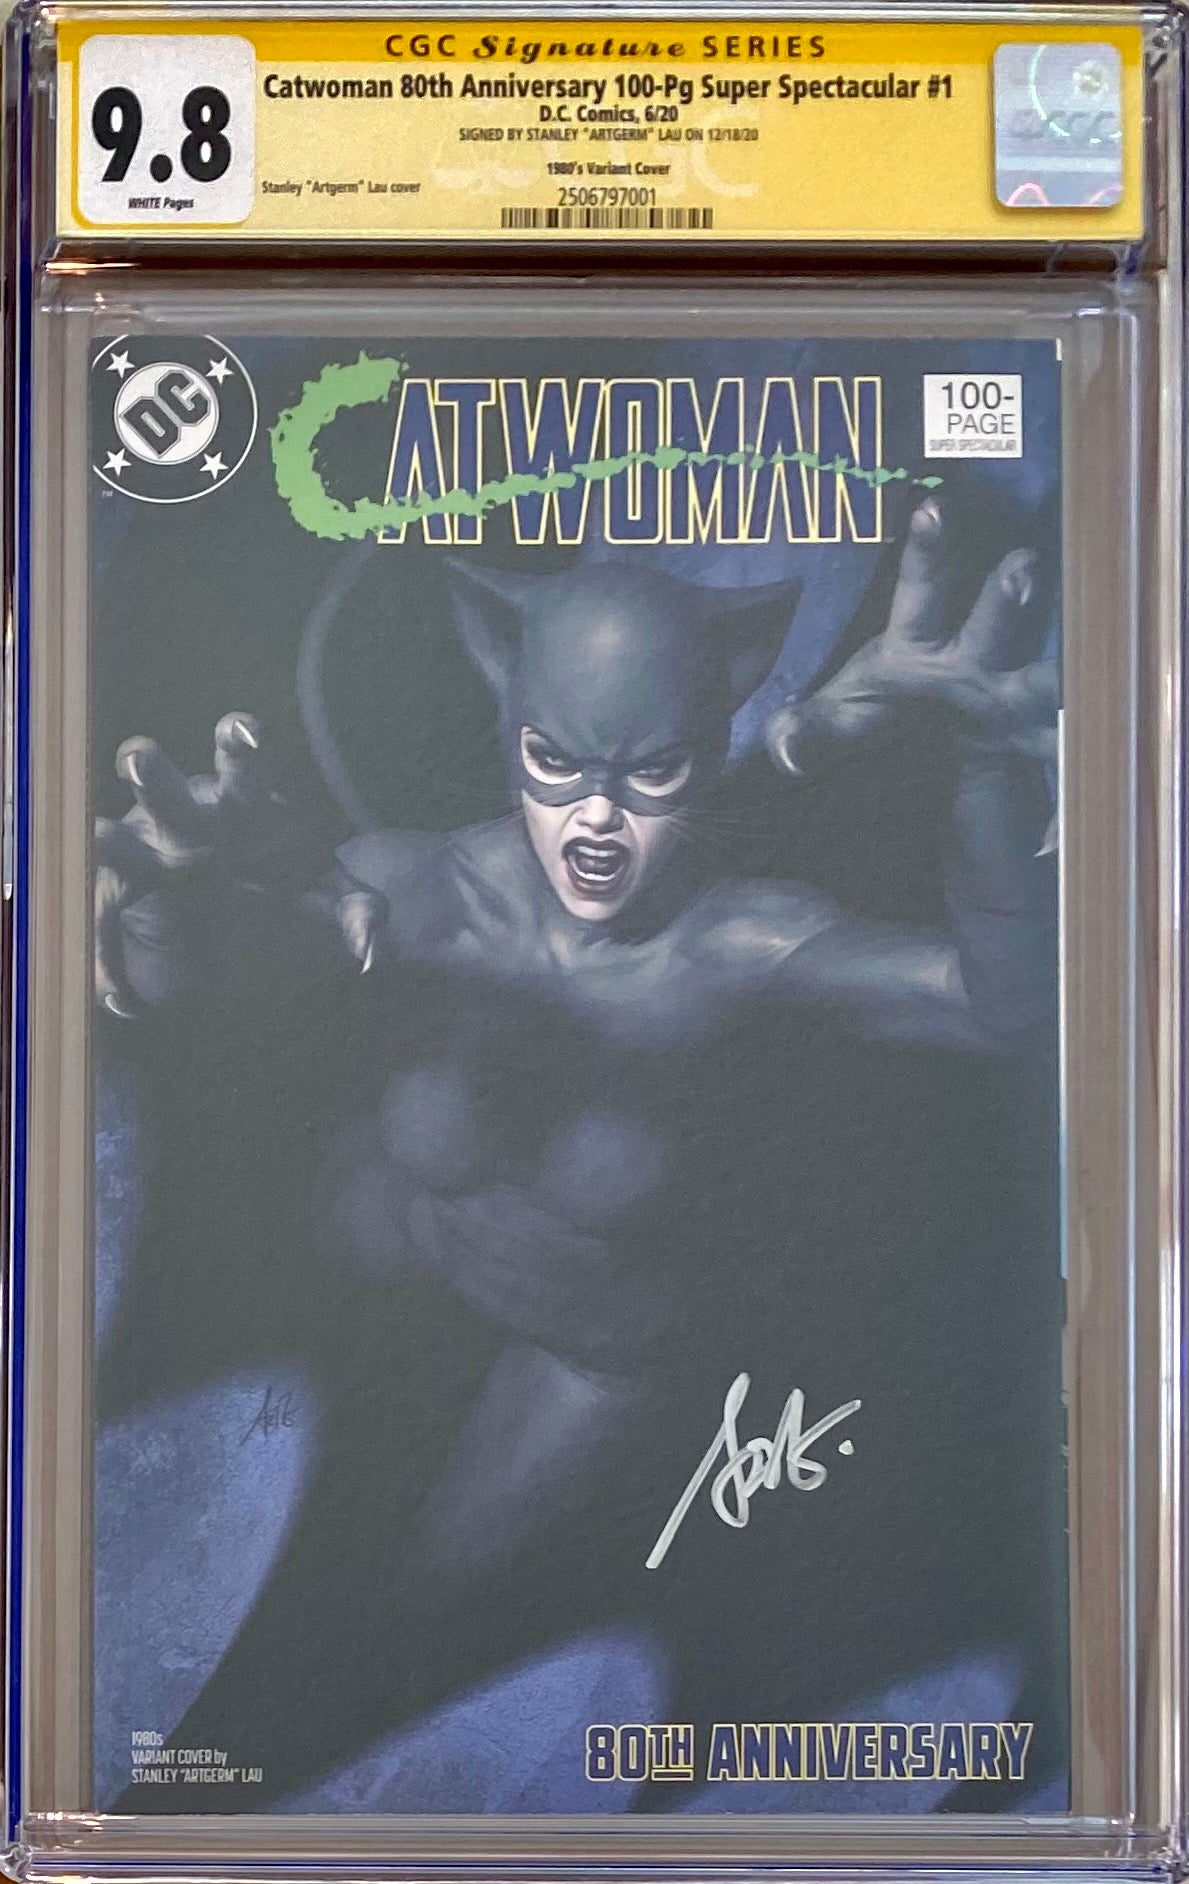 Catwoman 80th Anniversary 100 Page Super Spectacular #1 Artgerm 1980s Variant CGC 9.8 SS